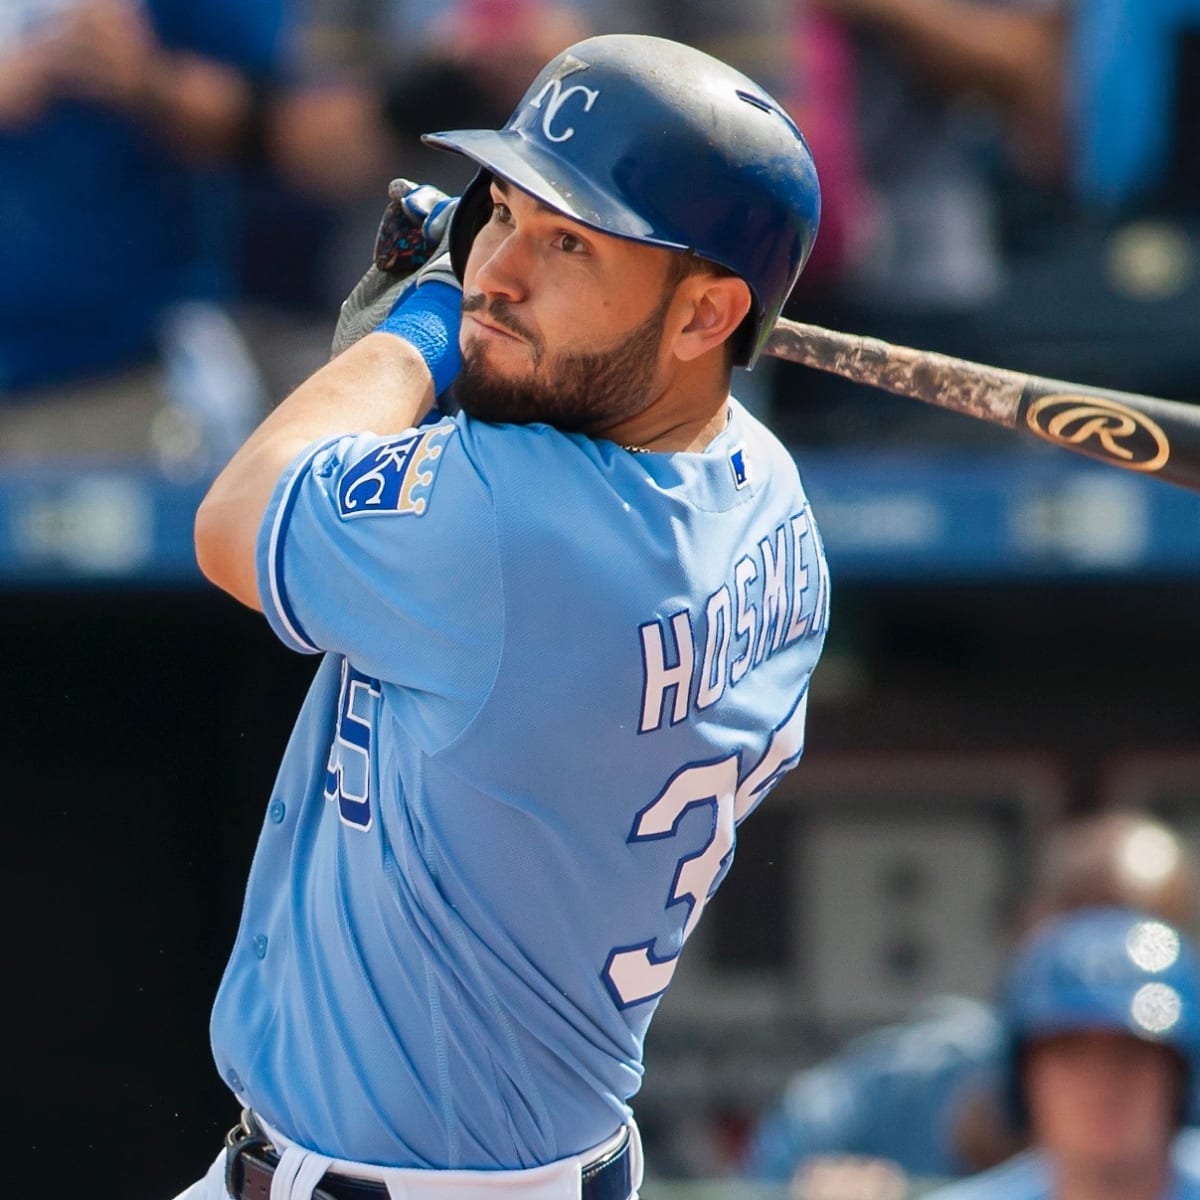 Eric Hosmer to the Padres or Royals? Pros and cons of his two